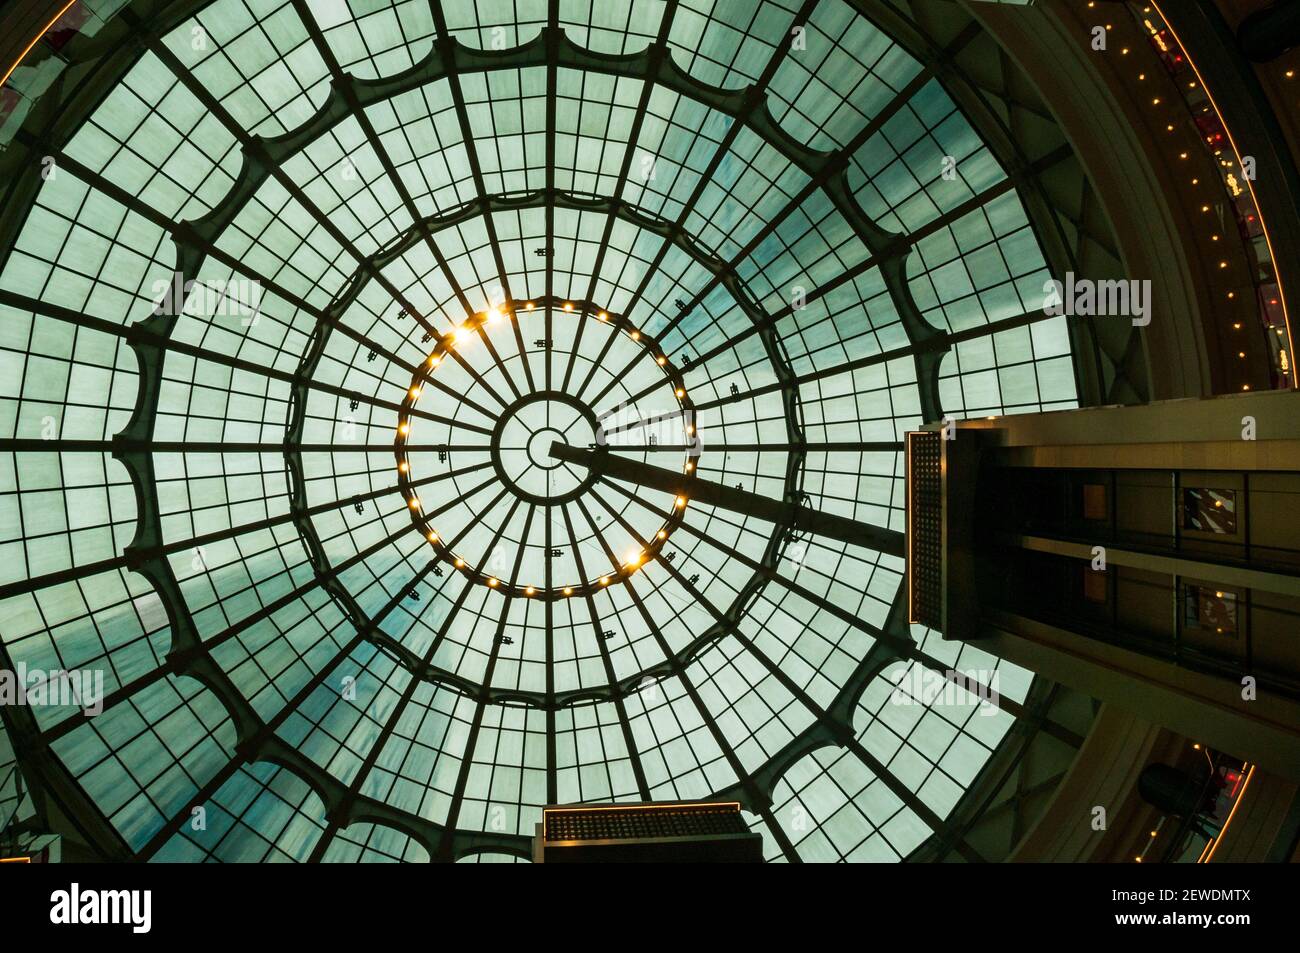 The glass dome roof of the Grand Gateway 66 shopping mall in Xujiahui, Xuhui District, Shanghai, China. Stock Photo